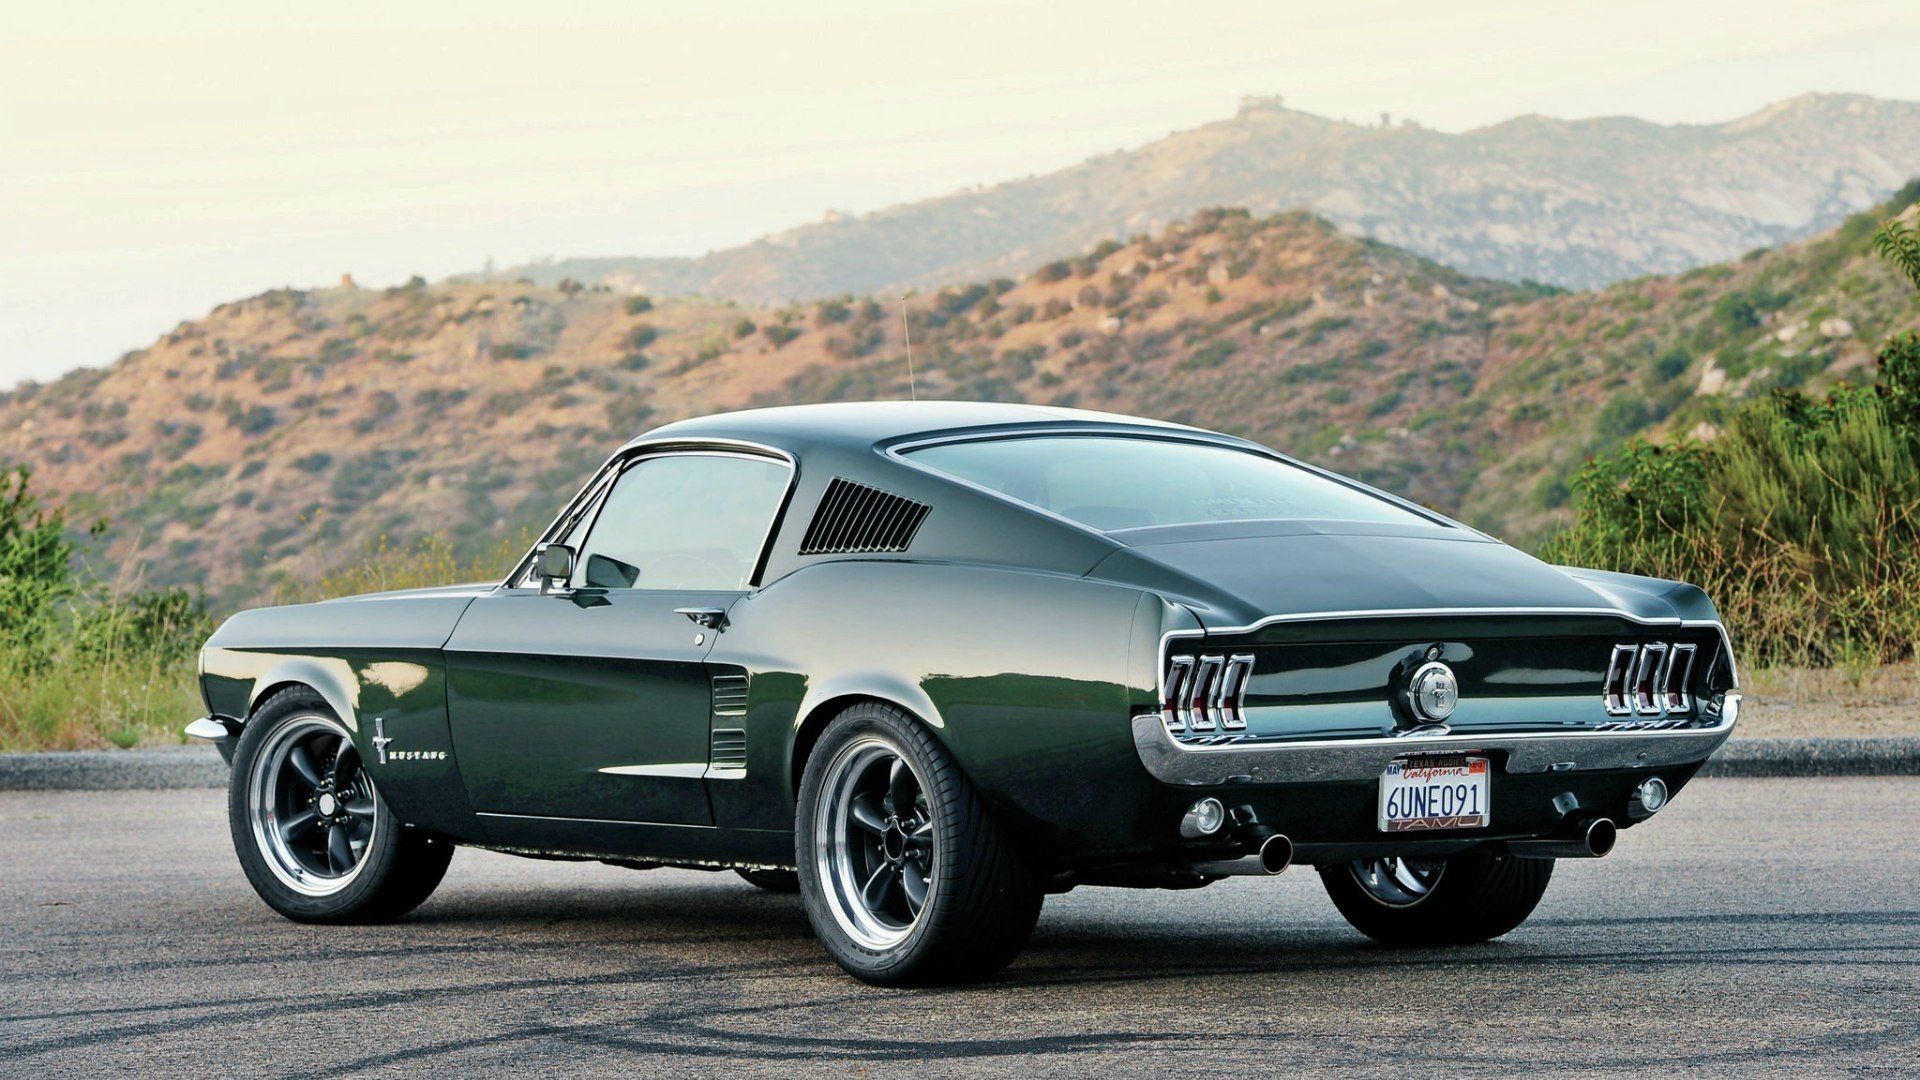 Ford Mustang Fastback HD Wallpaper. Background Imagex1080